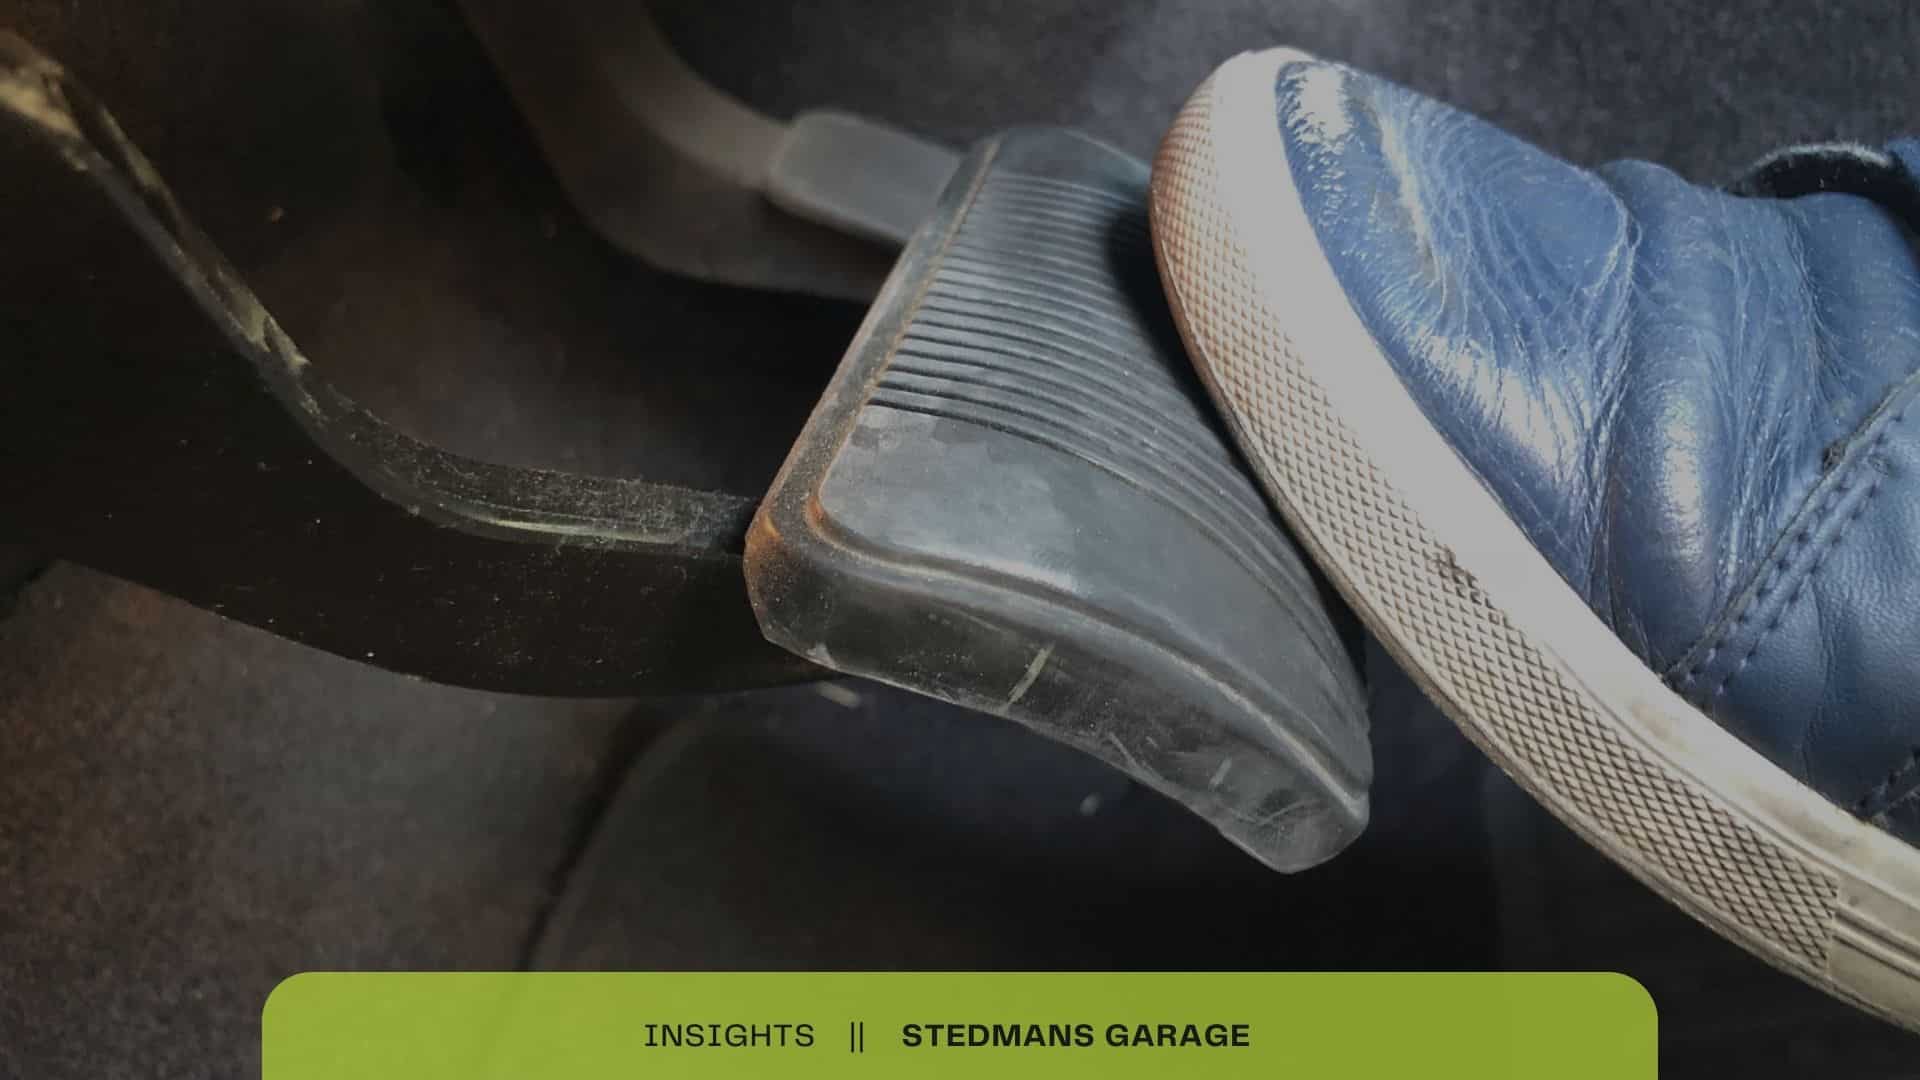 Explore common brake failure issues in Skoda vehicles, including causes, symptoms, repair steps, and the importance of regular maintenance for road safety